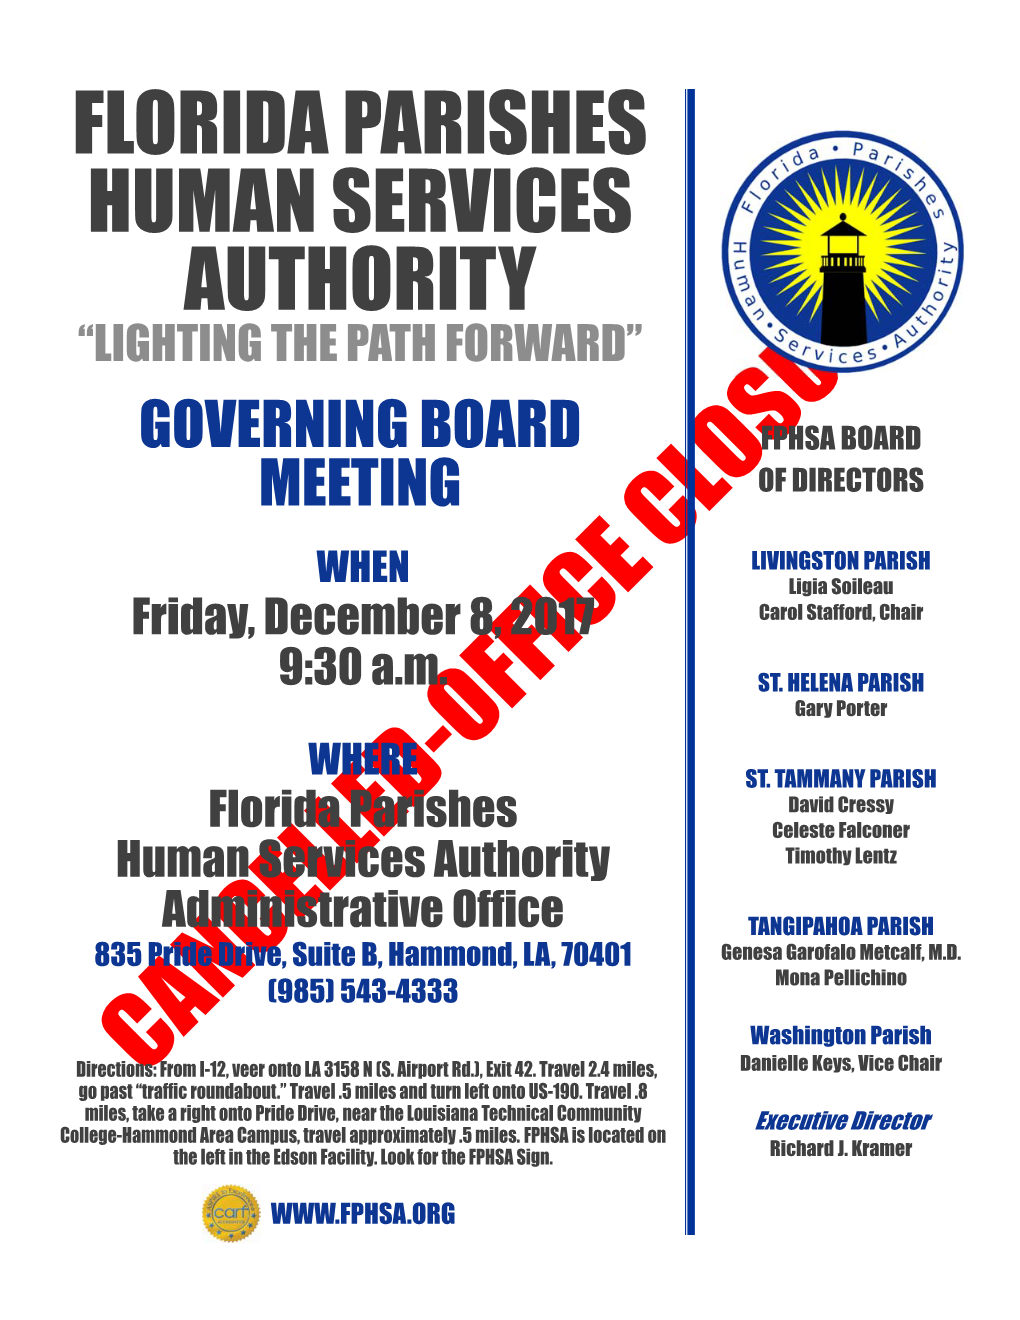 Florida Parishes Human Services Authority “Lighting the Path Forward”